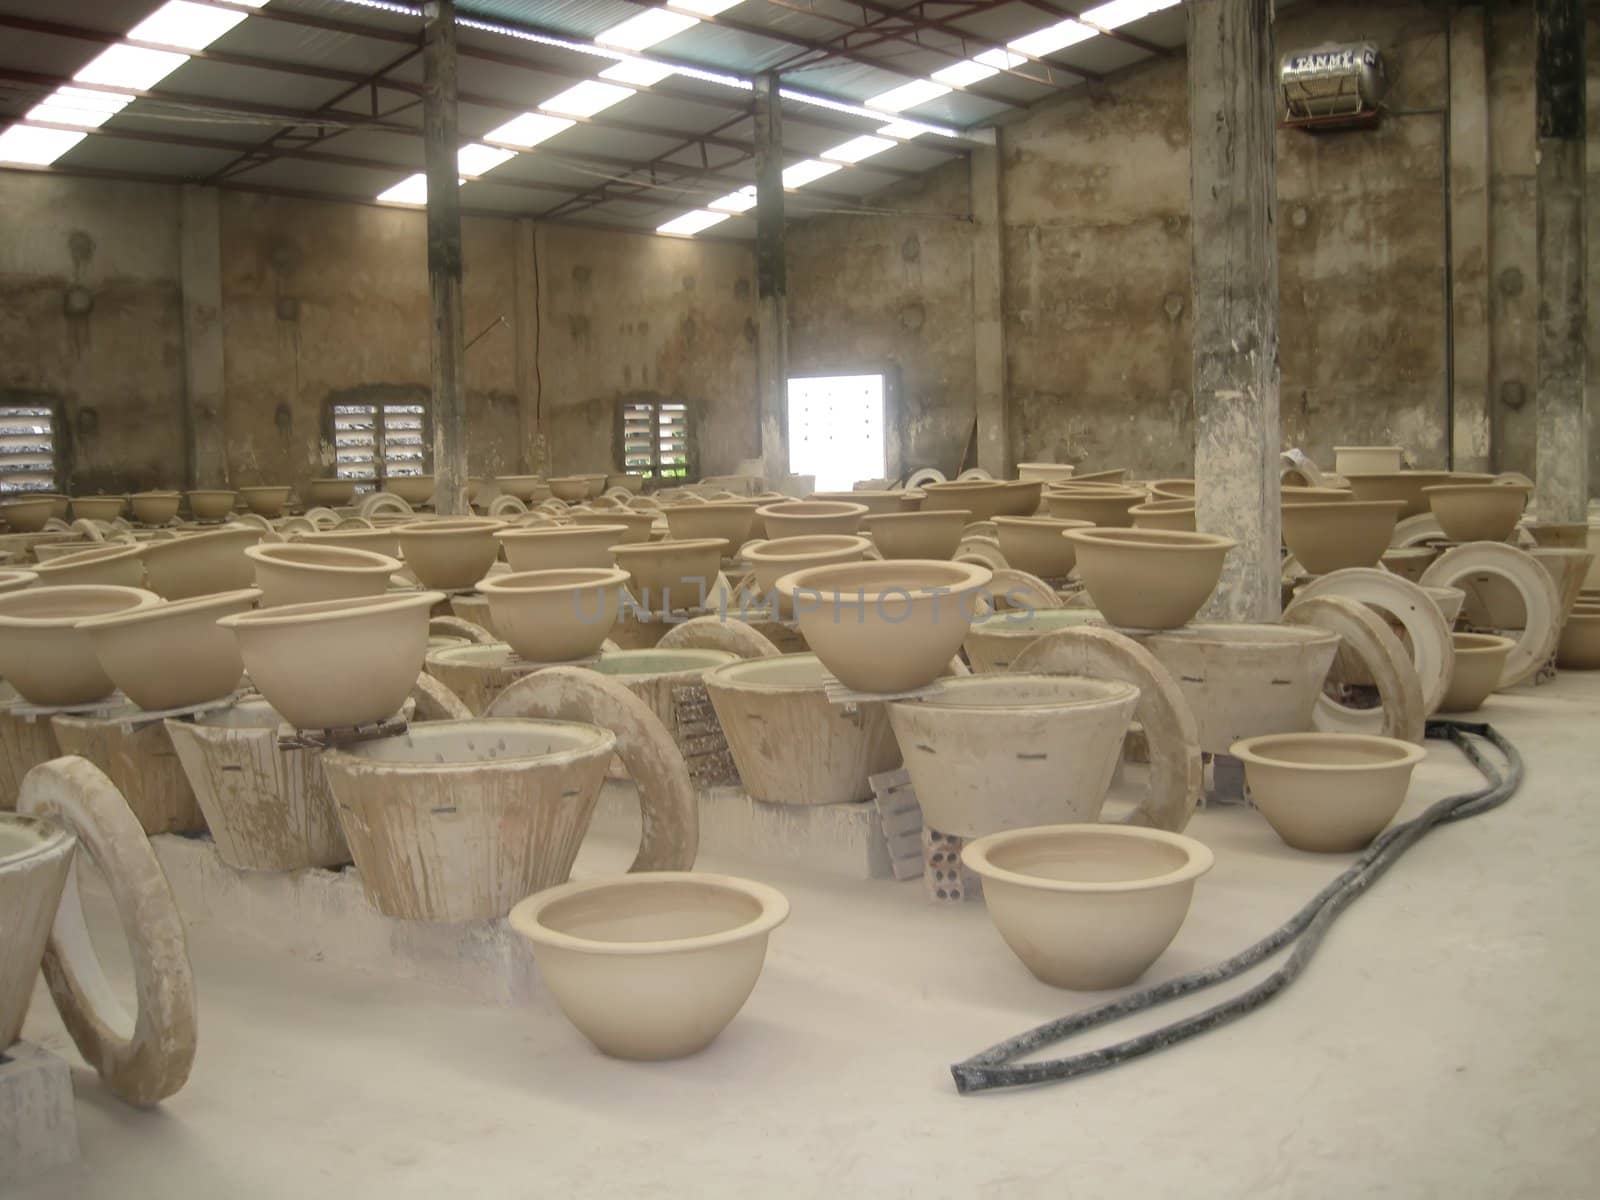 Drying Prefabricated Ceramic by ppart